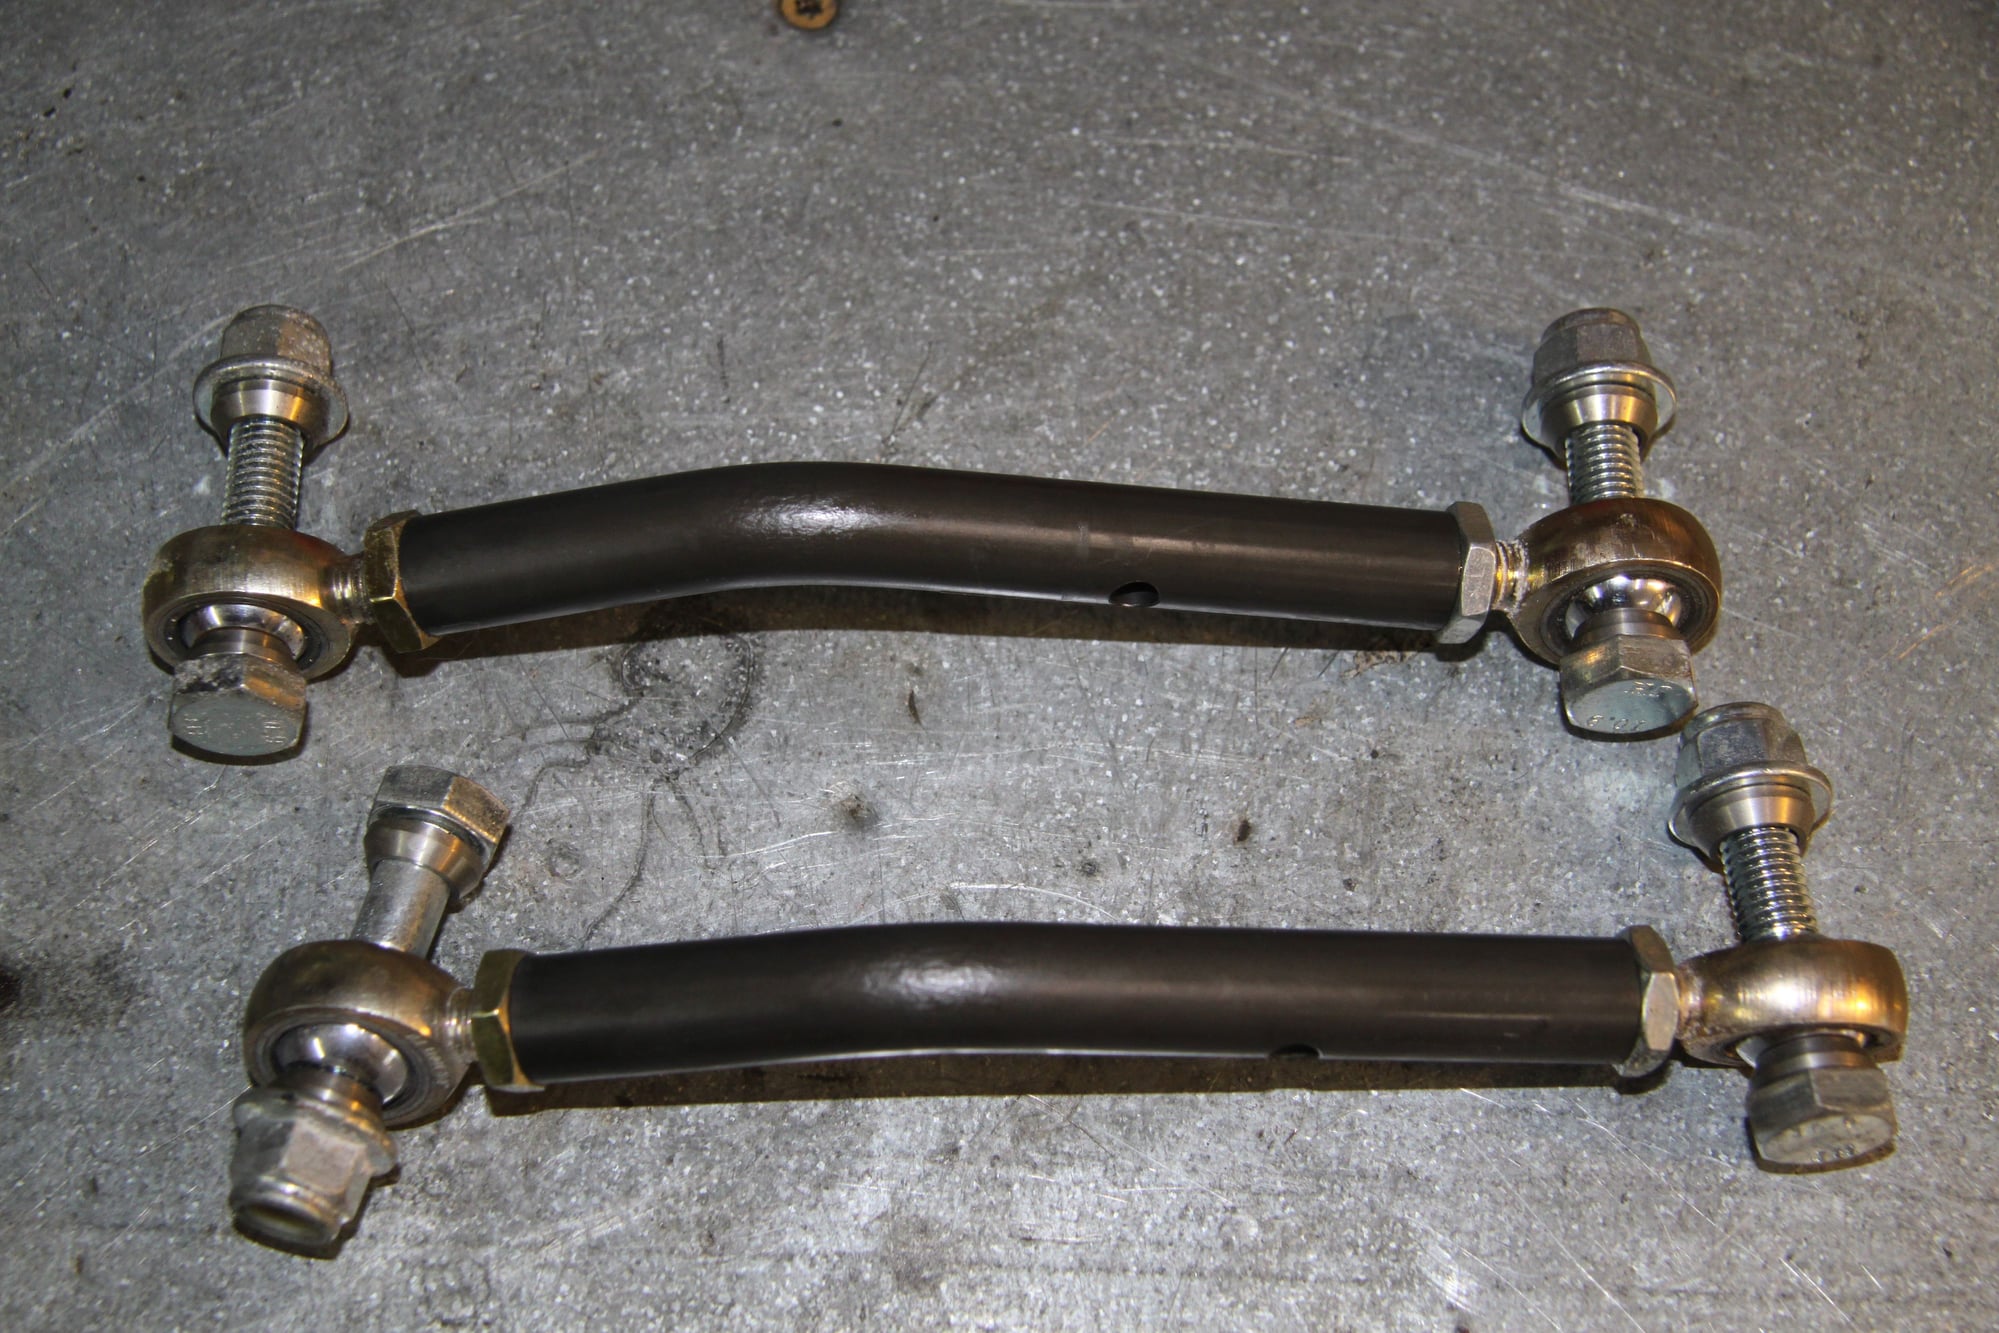 Steering/Suspension - 993 parts for sale - New pair of Curved RS-style rear drop links - New - 1995 to 1998 Porsche 911 - Danbury, CT 06810, United States